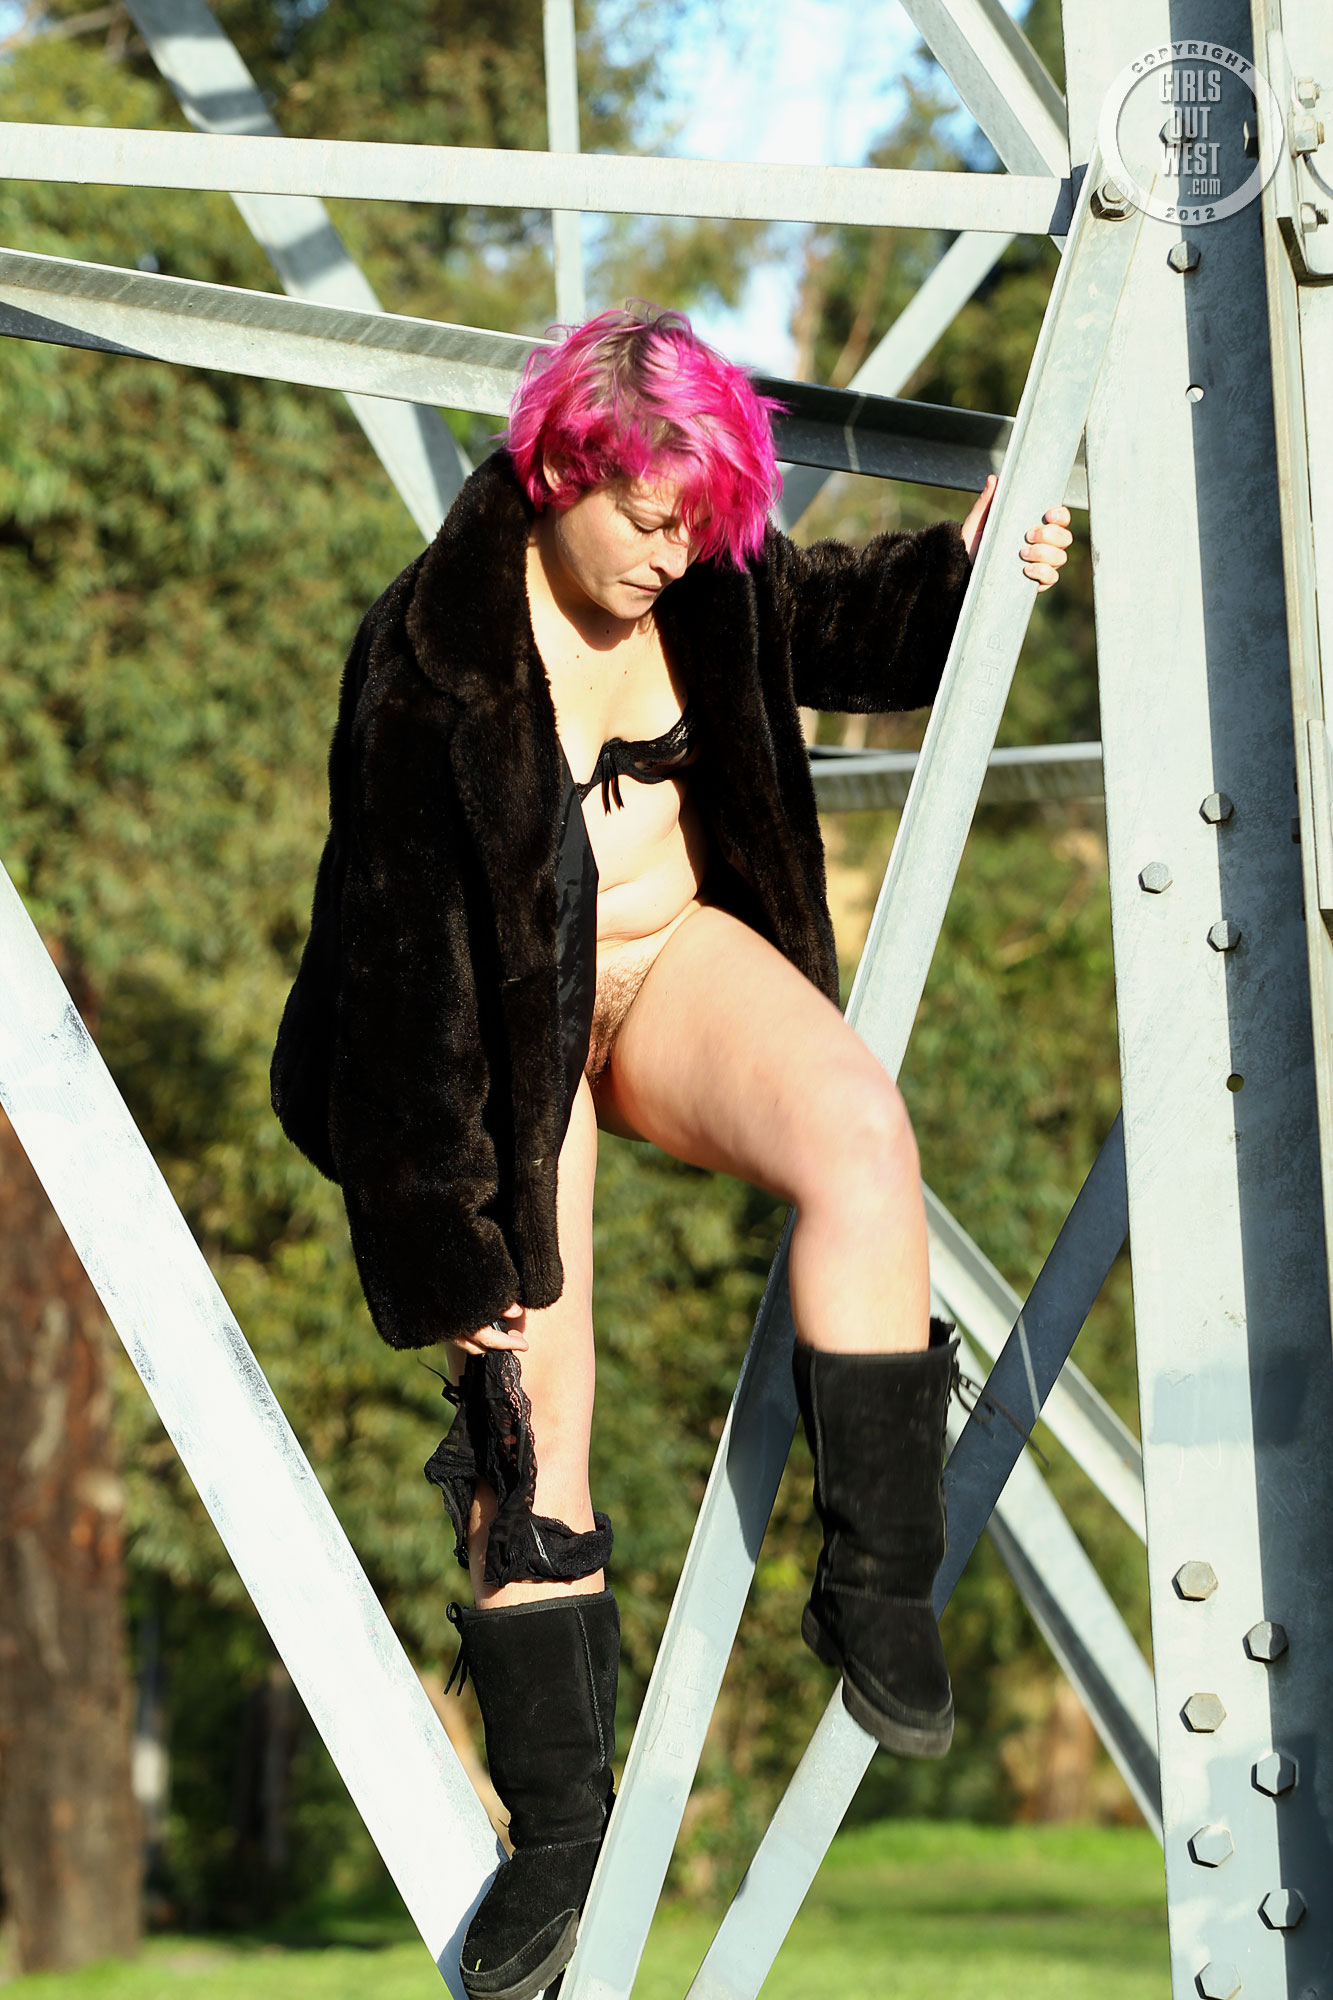 wpid-pink-haired-amateur-franky-flashing-her-pussy-outside-in-her-boots-and-coat7.jpg